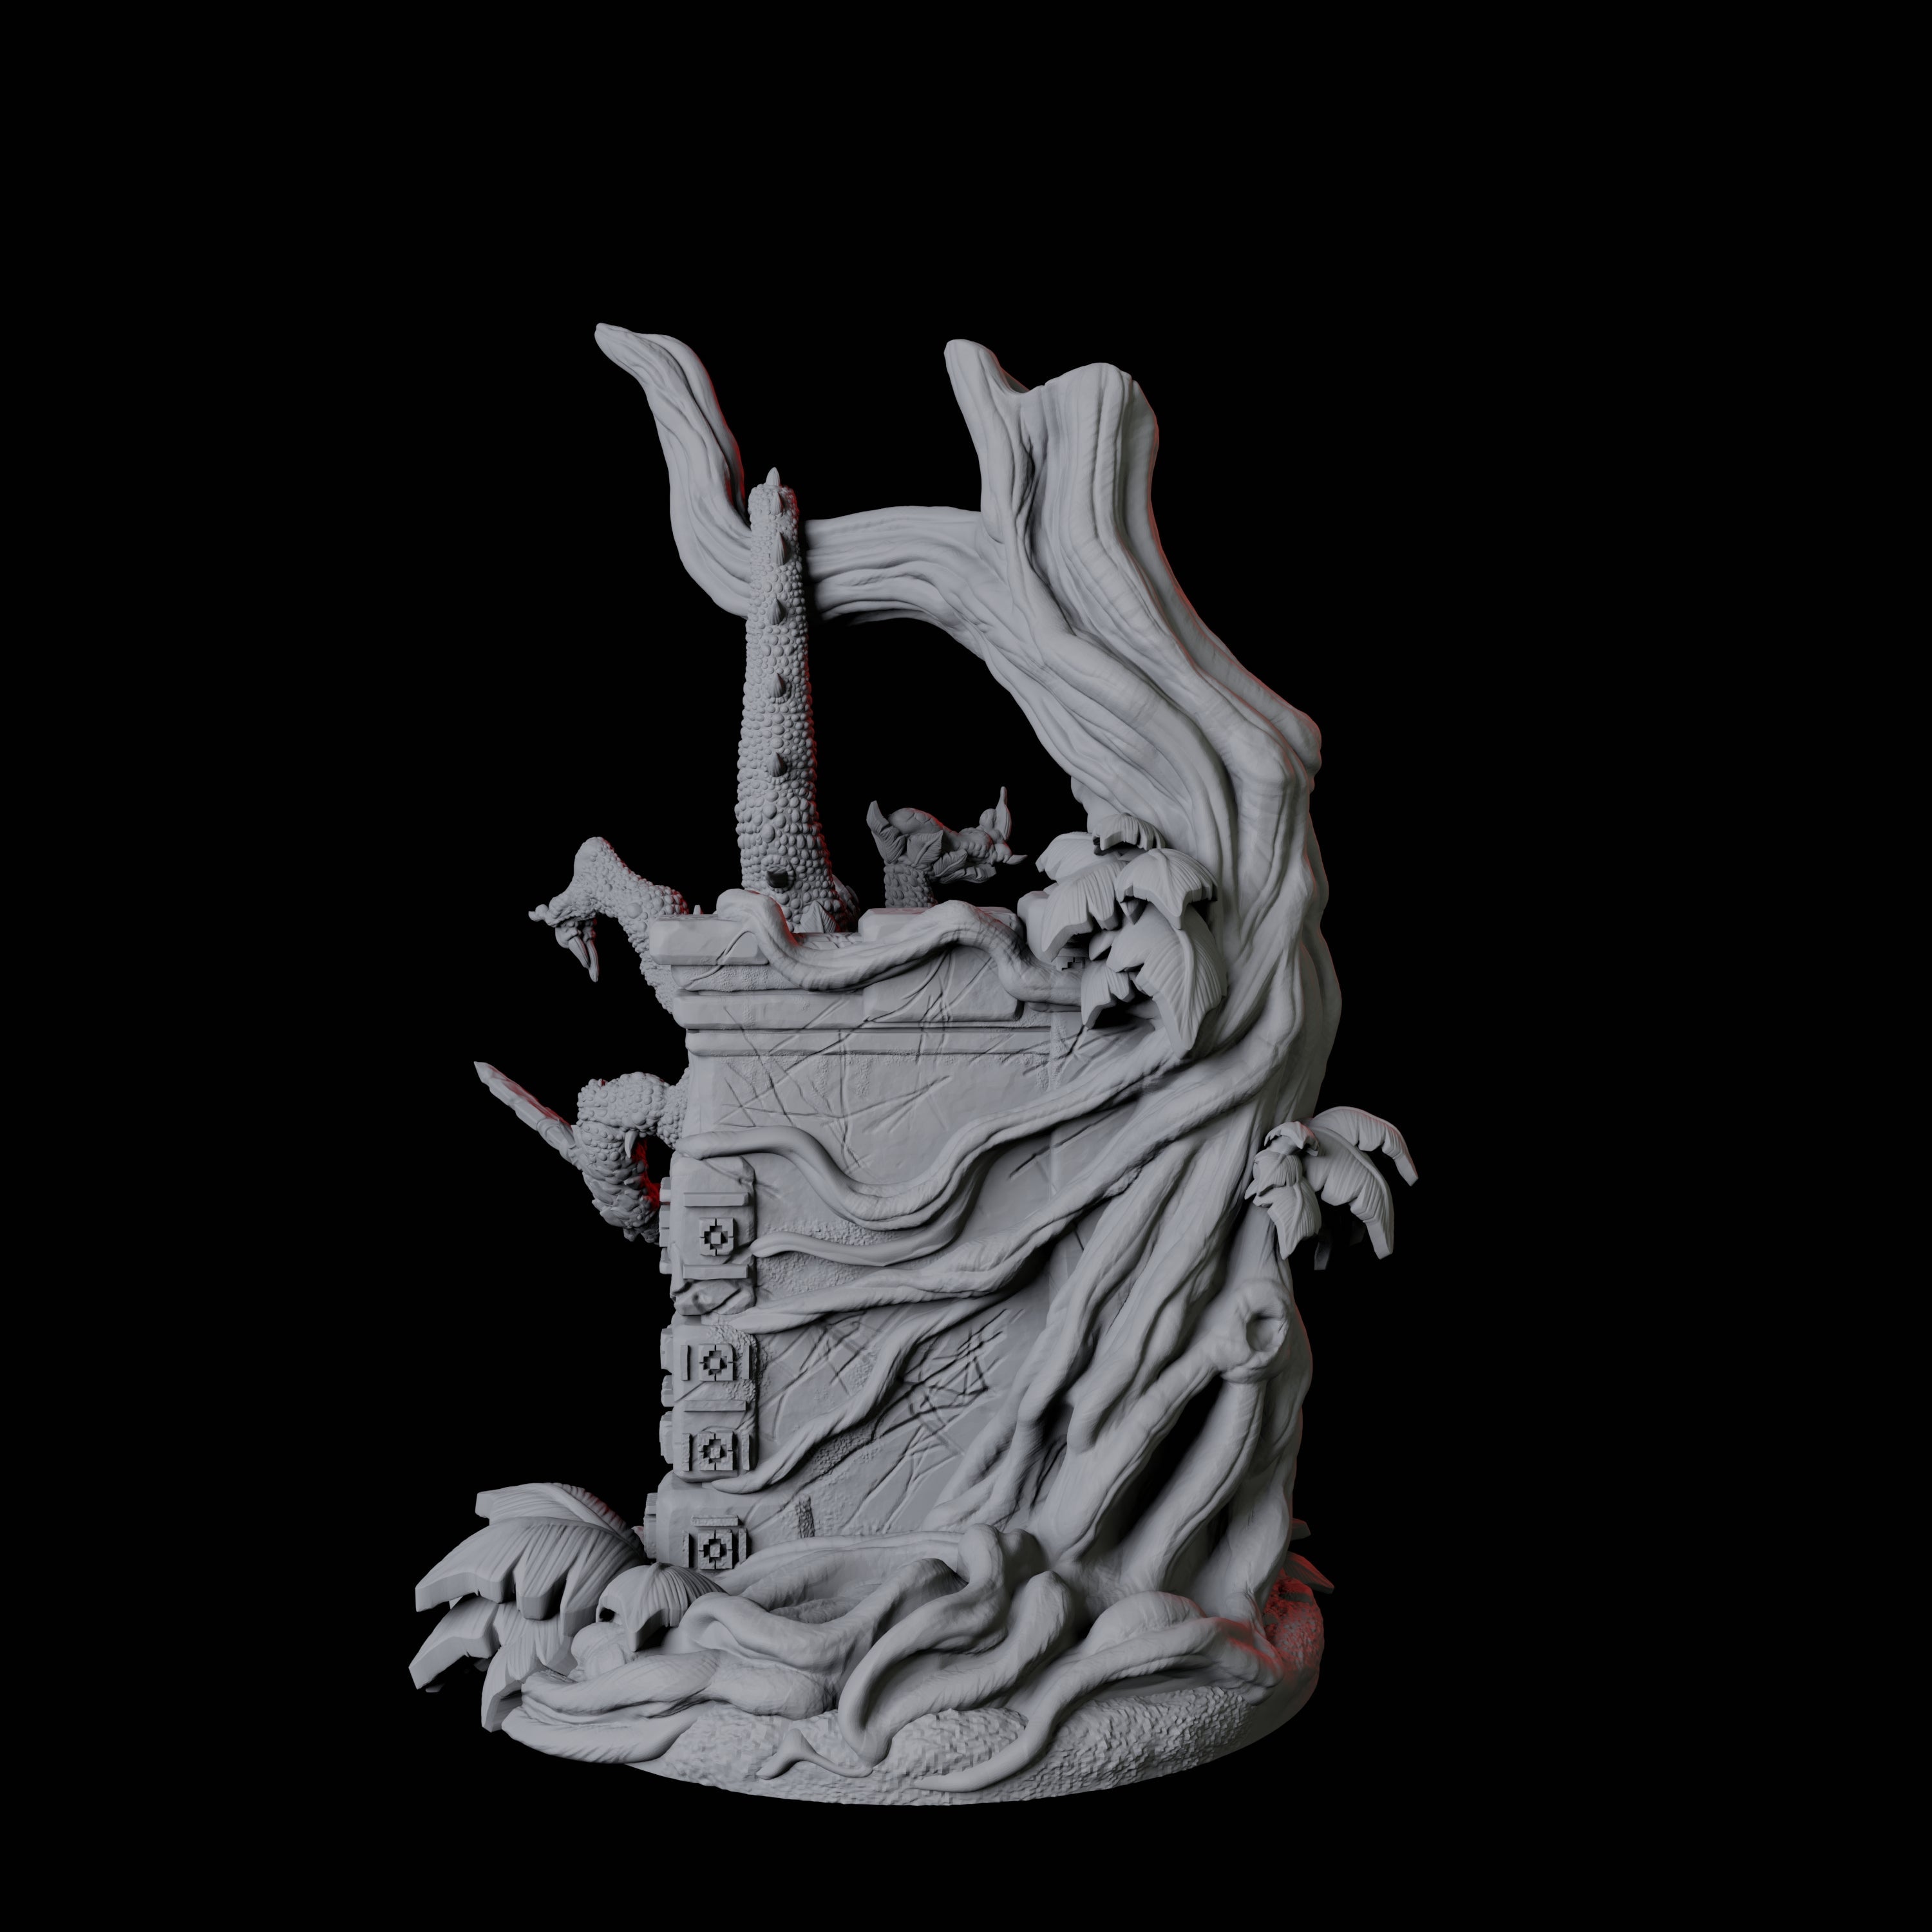 Grung Rogue D Miniature for Dungeons and Dragons, Pathfinder or other TTRPGs